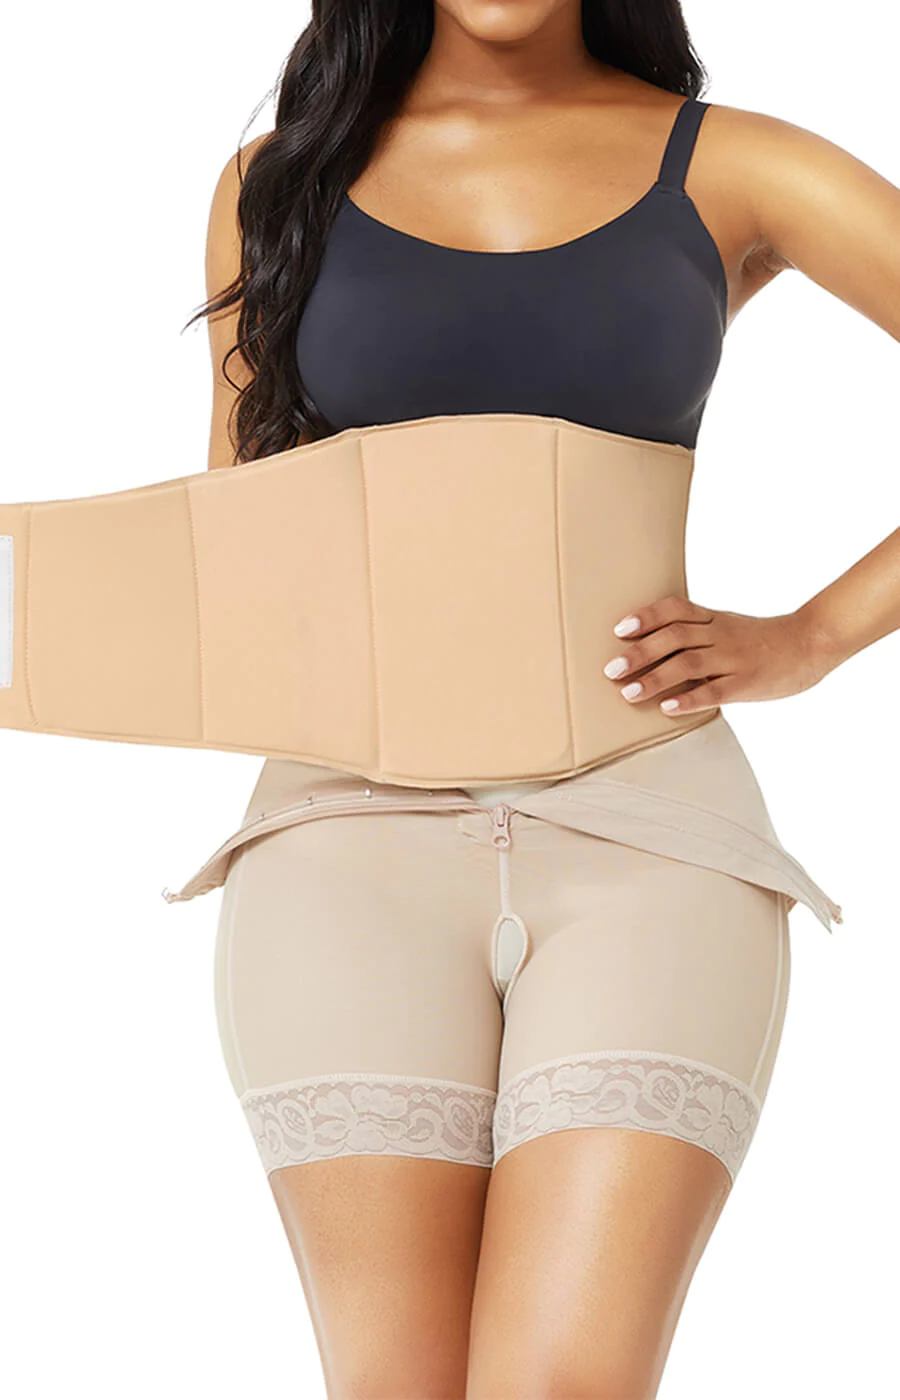 4 Types of Postpartum Shapewear Every New Mother Should Own